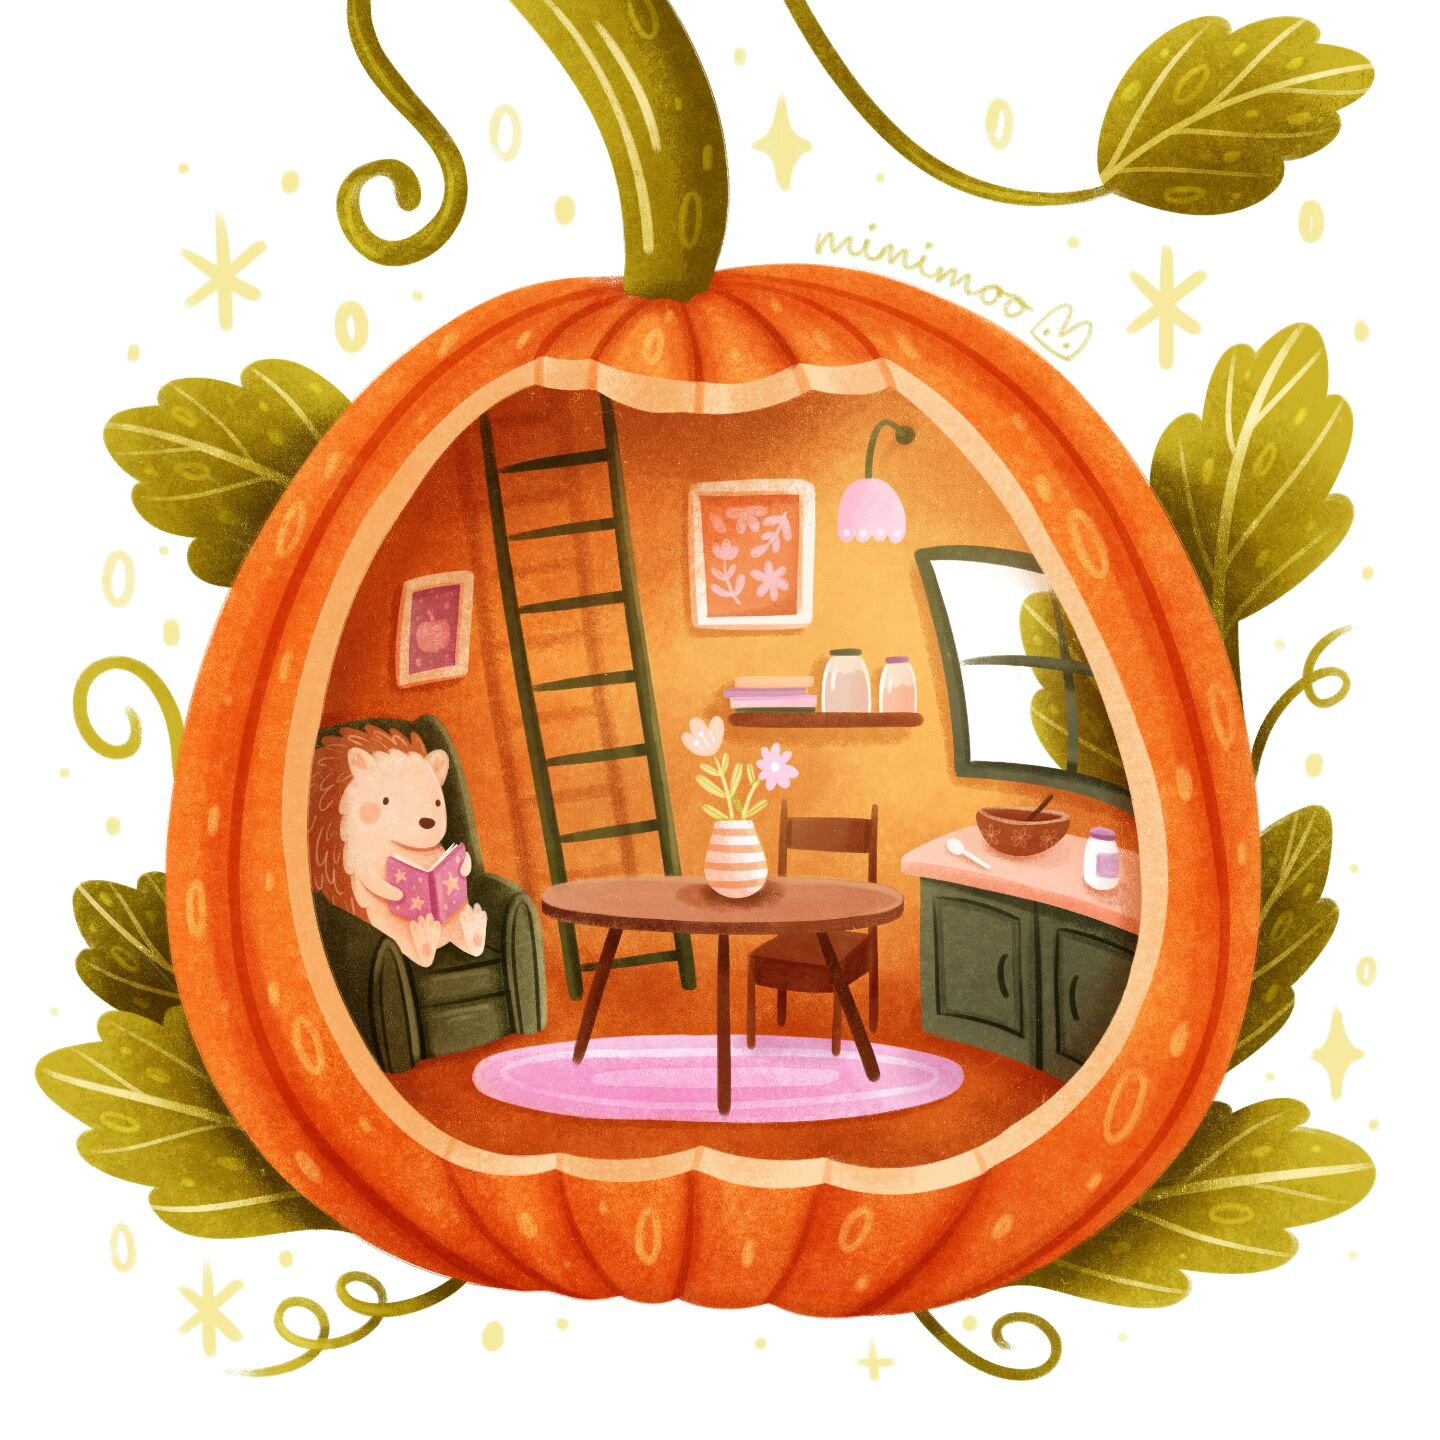 Hedgehog would like to know if anyone wants to join them for tea in their pumpkin home (after they've finished their book, of course)? 🙋&zwj;♀️

🌷 Brushes I used (from my brush packs): Mimi Simple Sketching, Mimi Medium Crayon, Mimi Soft Crayon, Mi